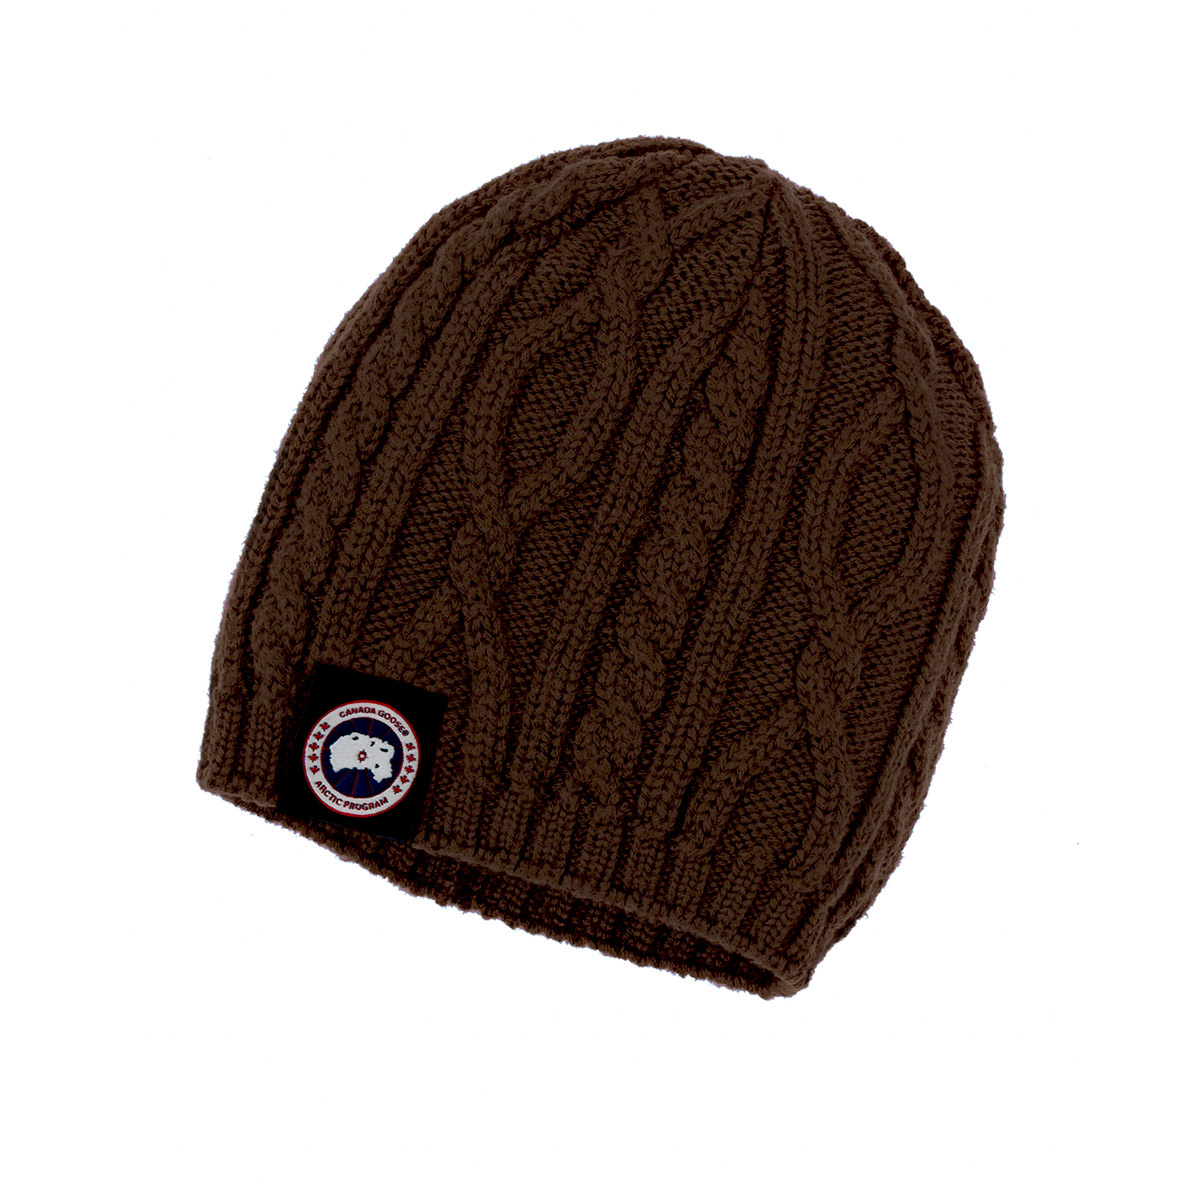 Canada Goose Unisex Merino Cable-Knit Beanie CARIBOU